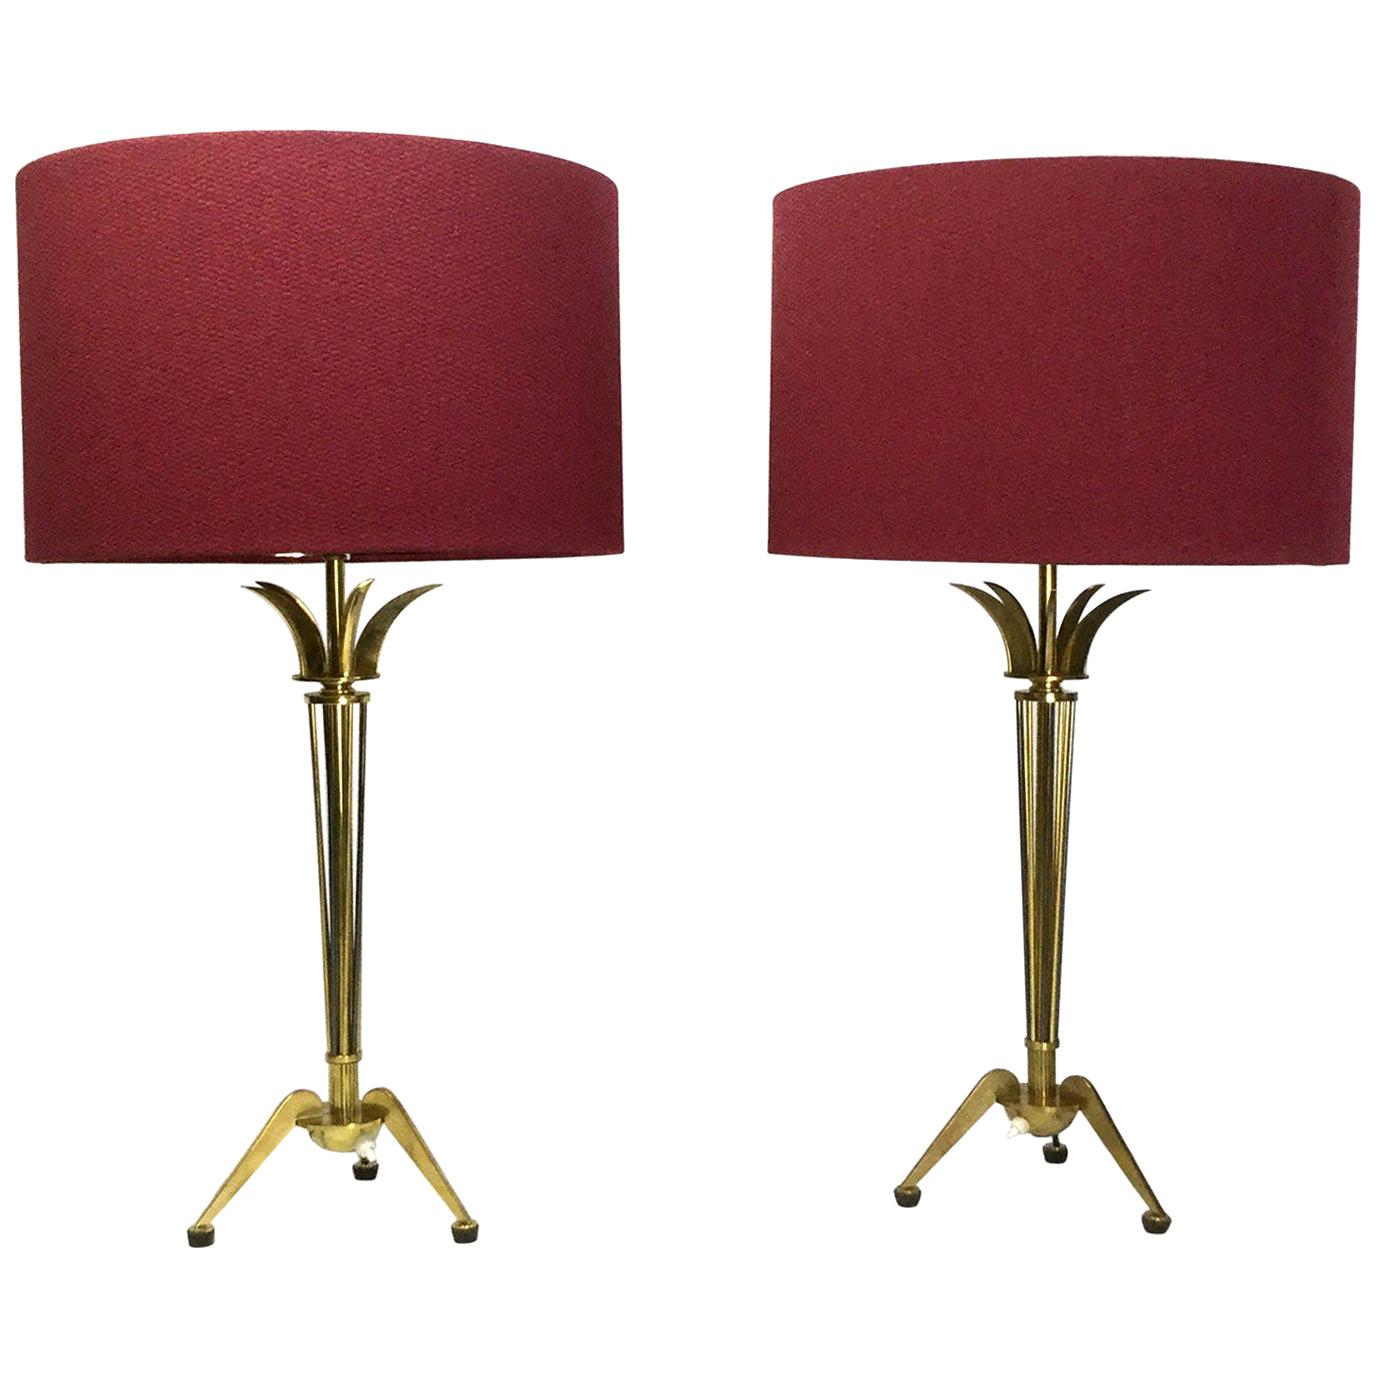 Pair of Brass Table Lamps by Maison Arlus for Maison Jansen, France, 1950s